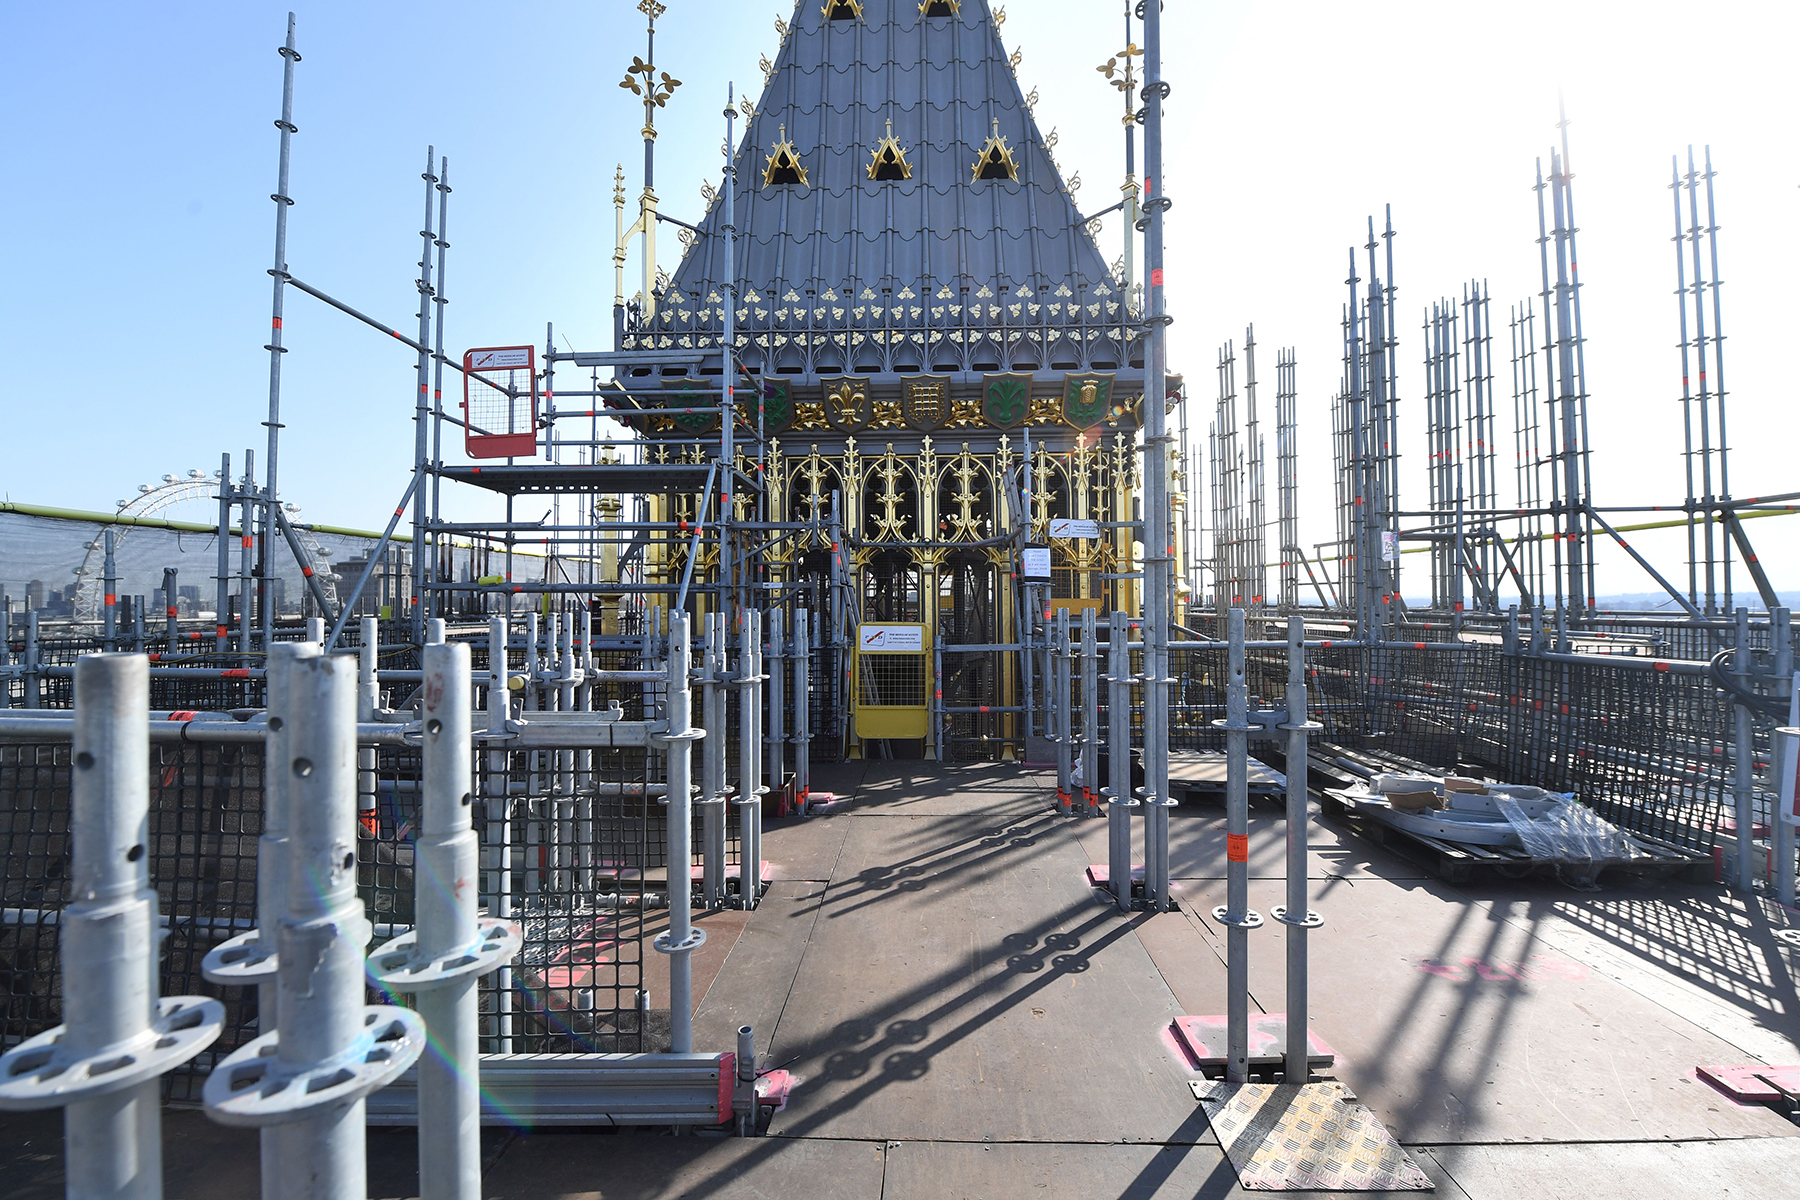 The scaffolding system was one of the most complex aspects of the overall tower project (©UK Parliament, Jessica Taylor)